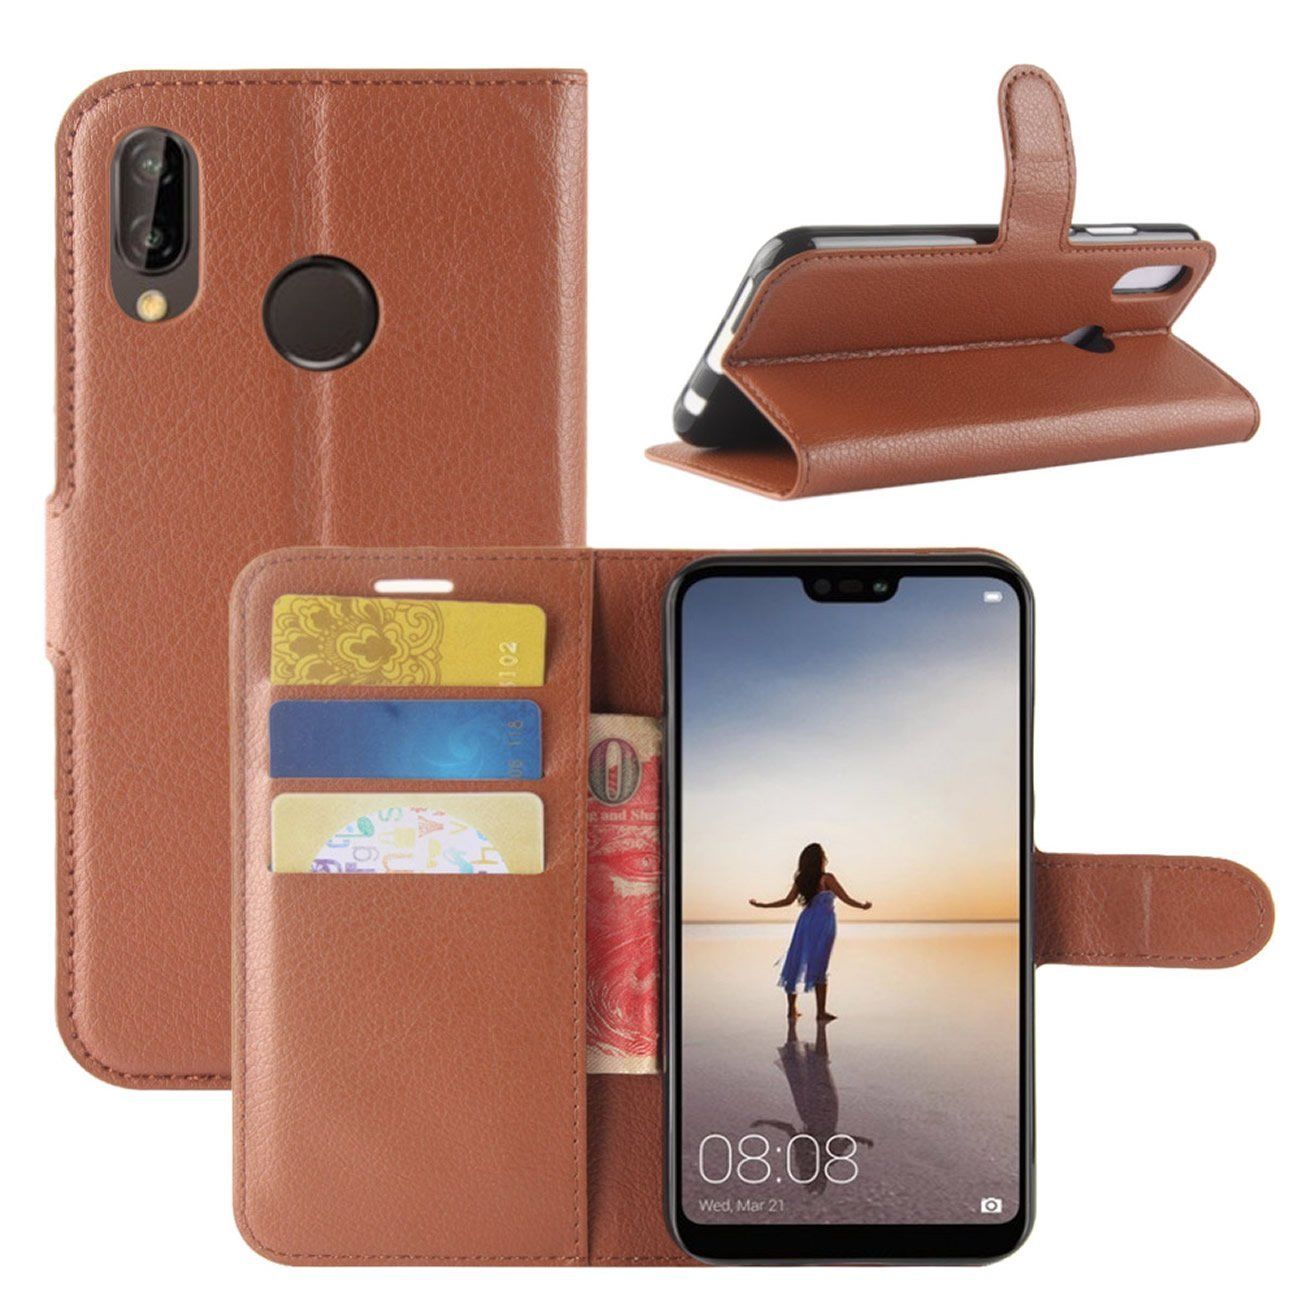 New Premium Leather Wallet Case TPU Cover For HUAWEI Nova 3e-Brown